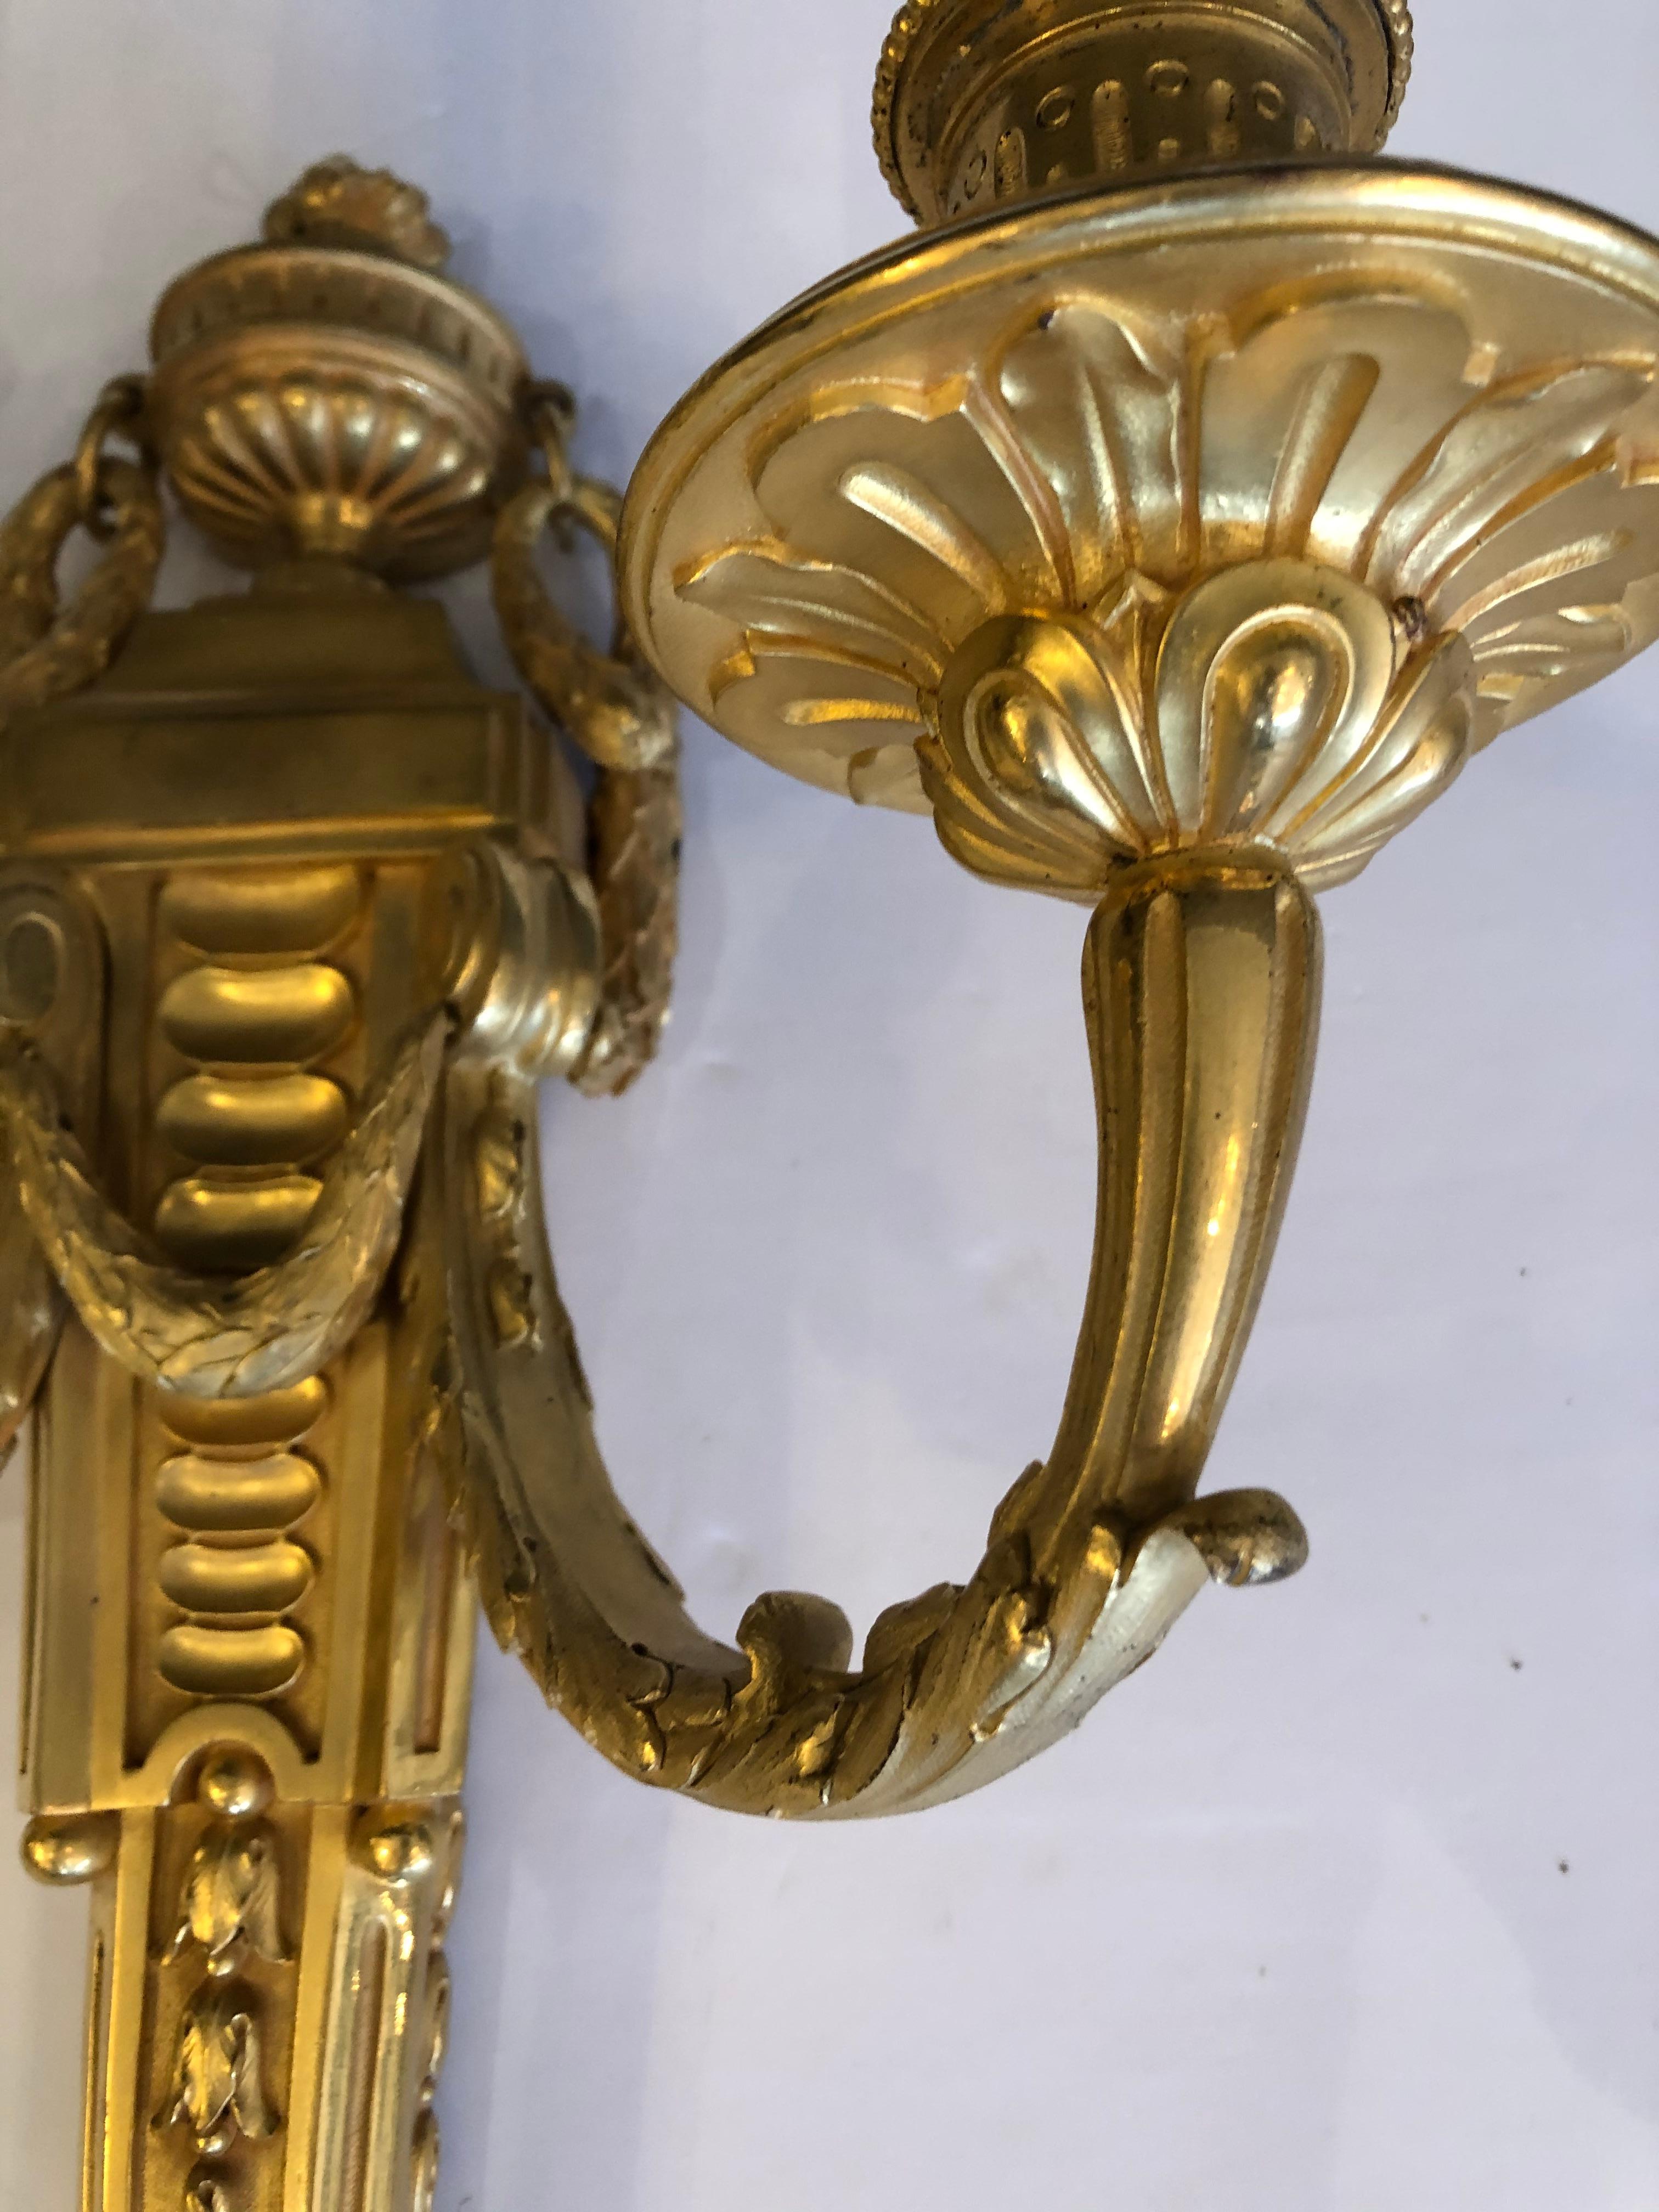 Awe Inspiring Dore Gilt Bronze Regency Style Sconces by Caldwell In Excellent Condition For Sale In Hopewell, NJ